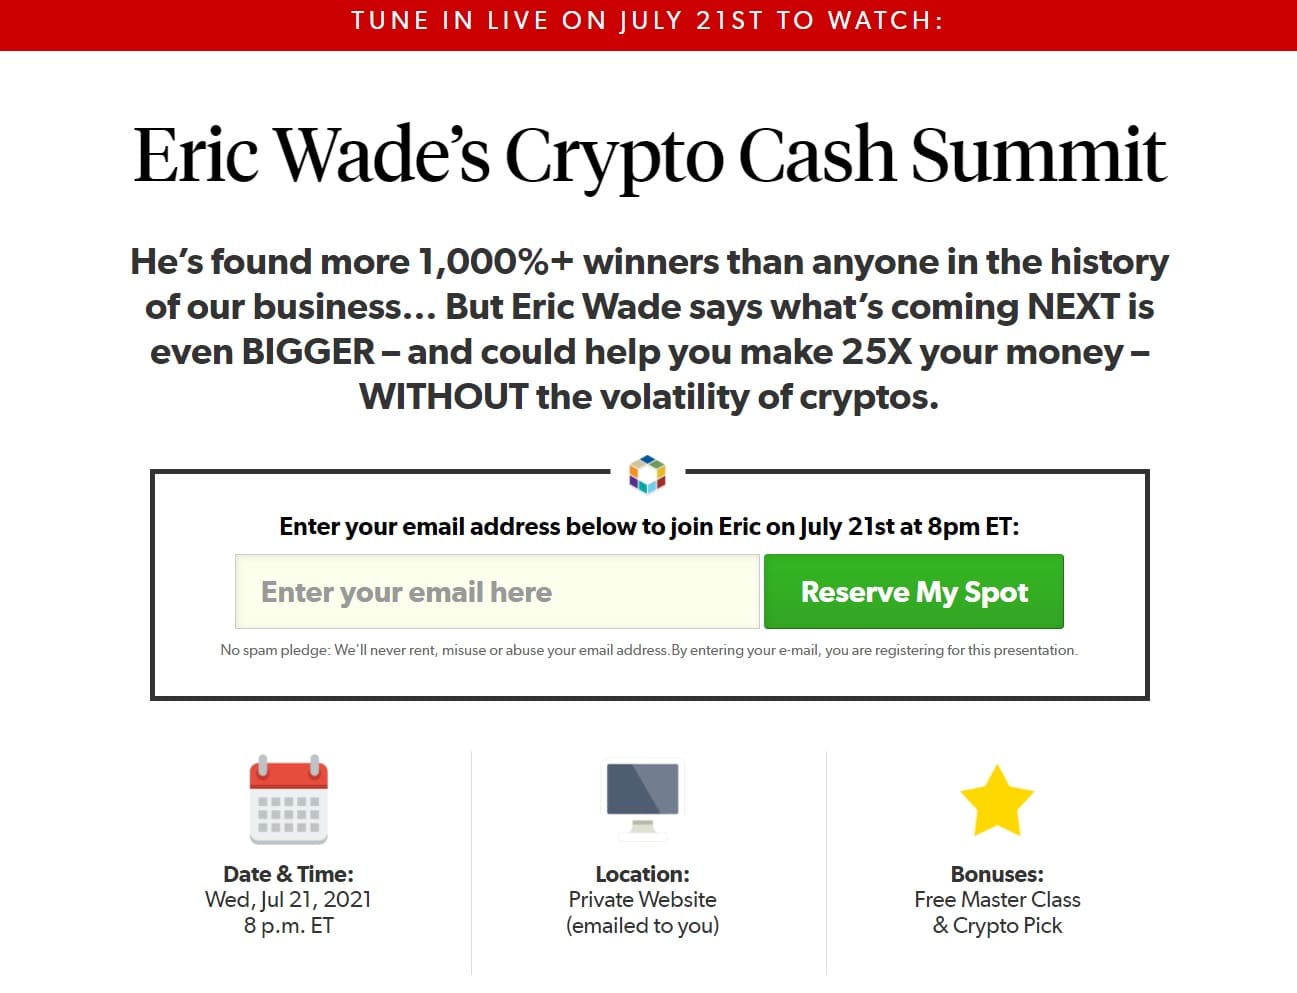 Eric Wade’s Crypto Cash Summit Review